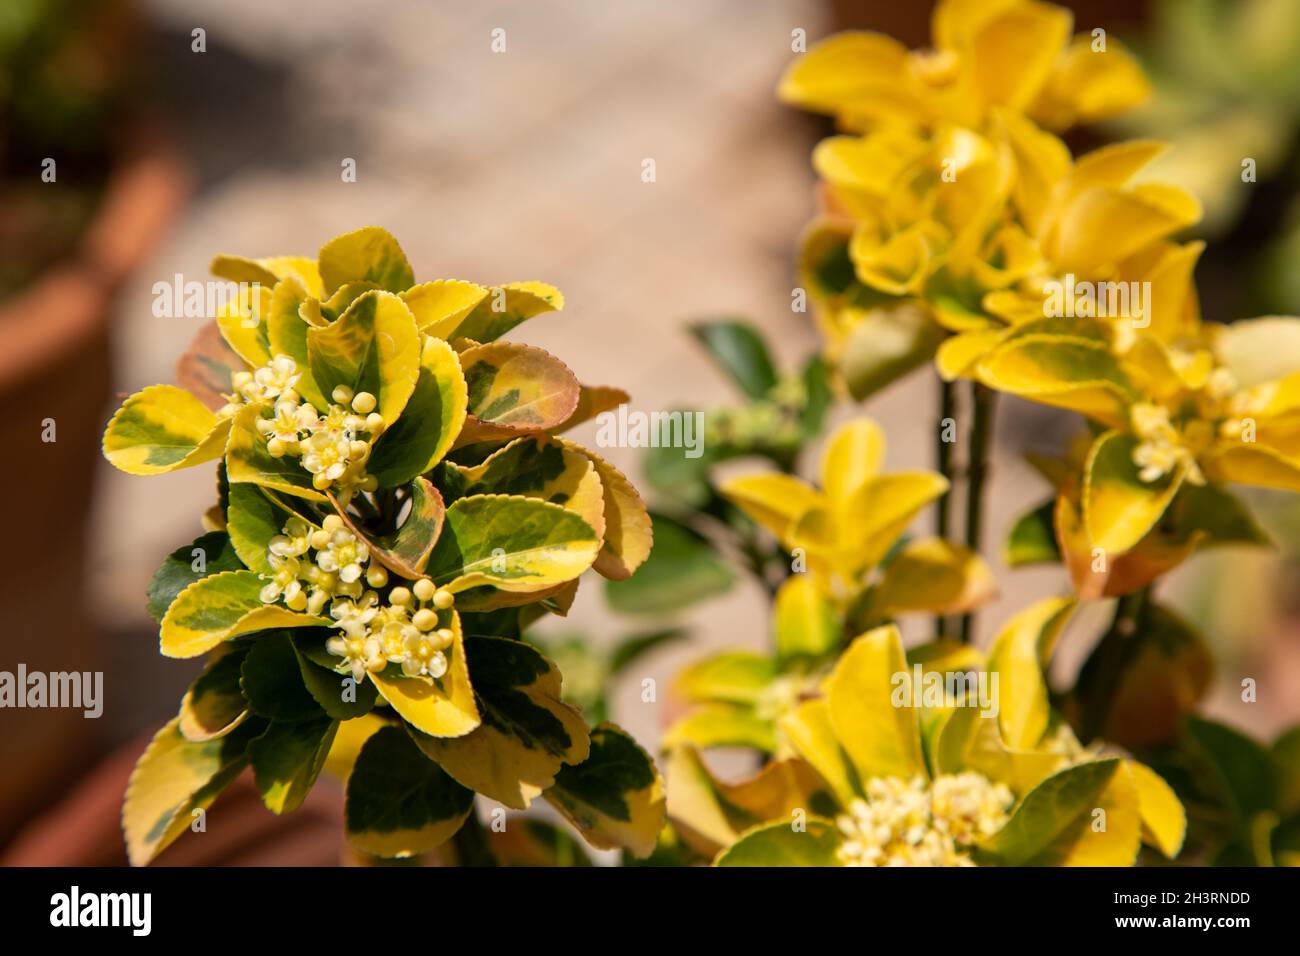 Euonymus Japonica, can be grown as a hedge plant or grown in pots. Species of flowering plant in the Celastraceae family. Selective focus. Stock Photo